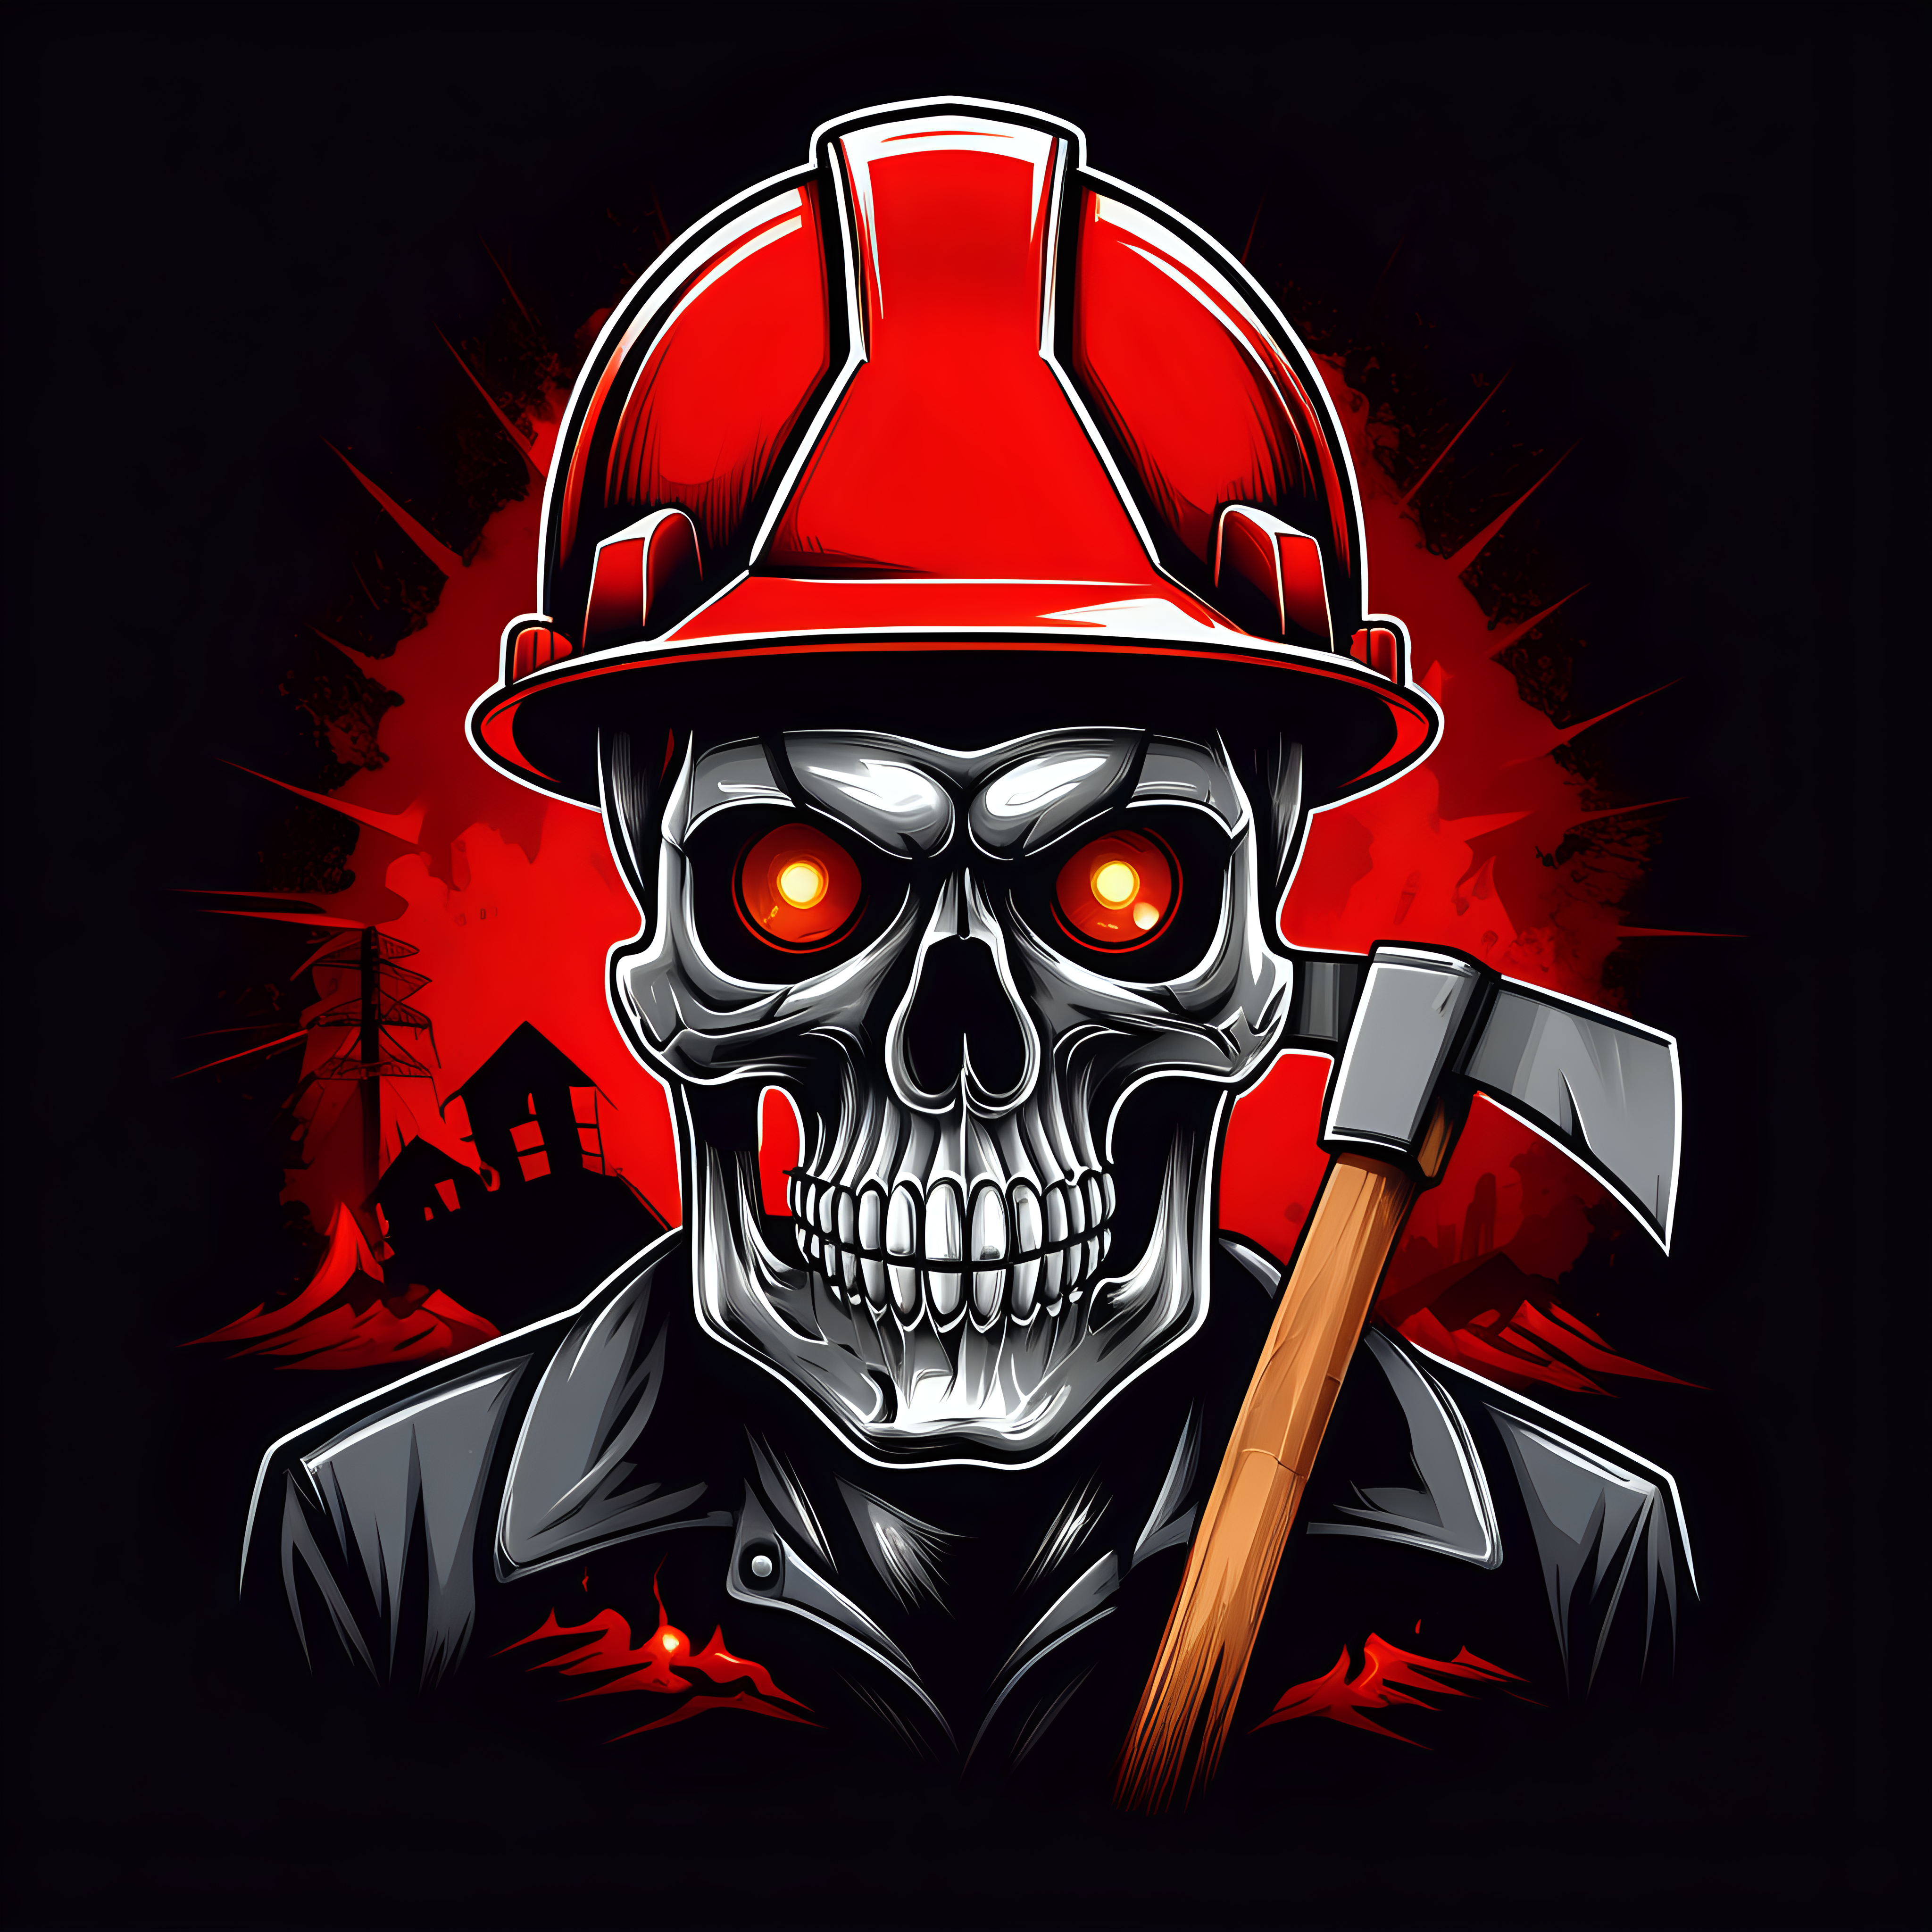 Foreman skull with construction worker helmet and lamp